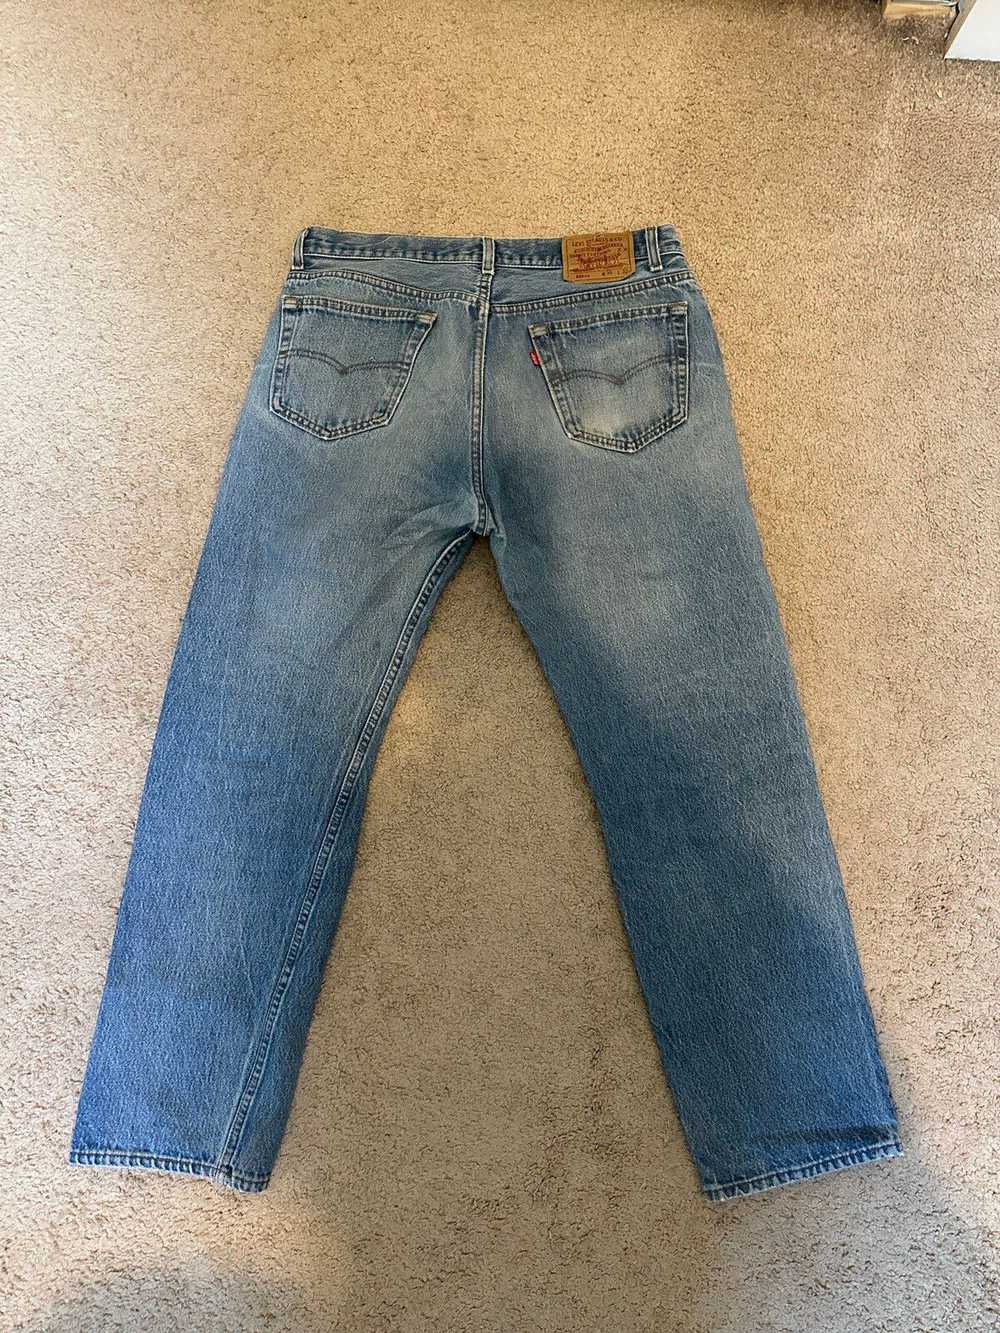 Levi's Vintage Levi’s 501 Made in USA 90’s - image 2